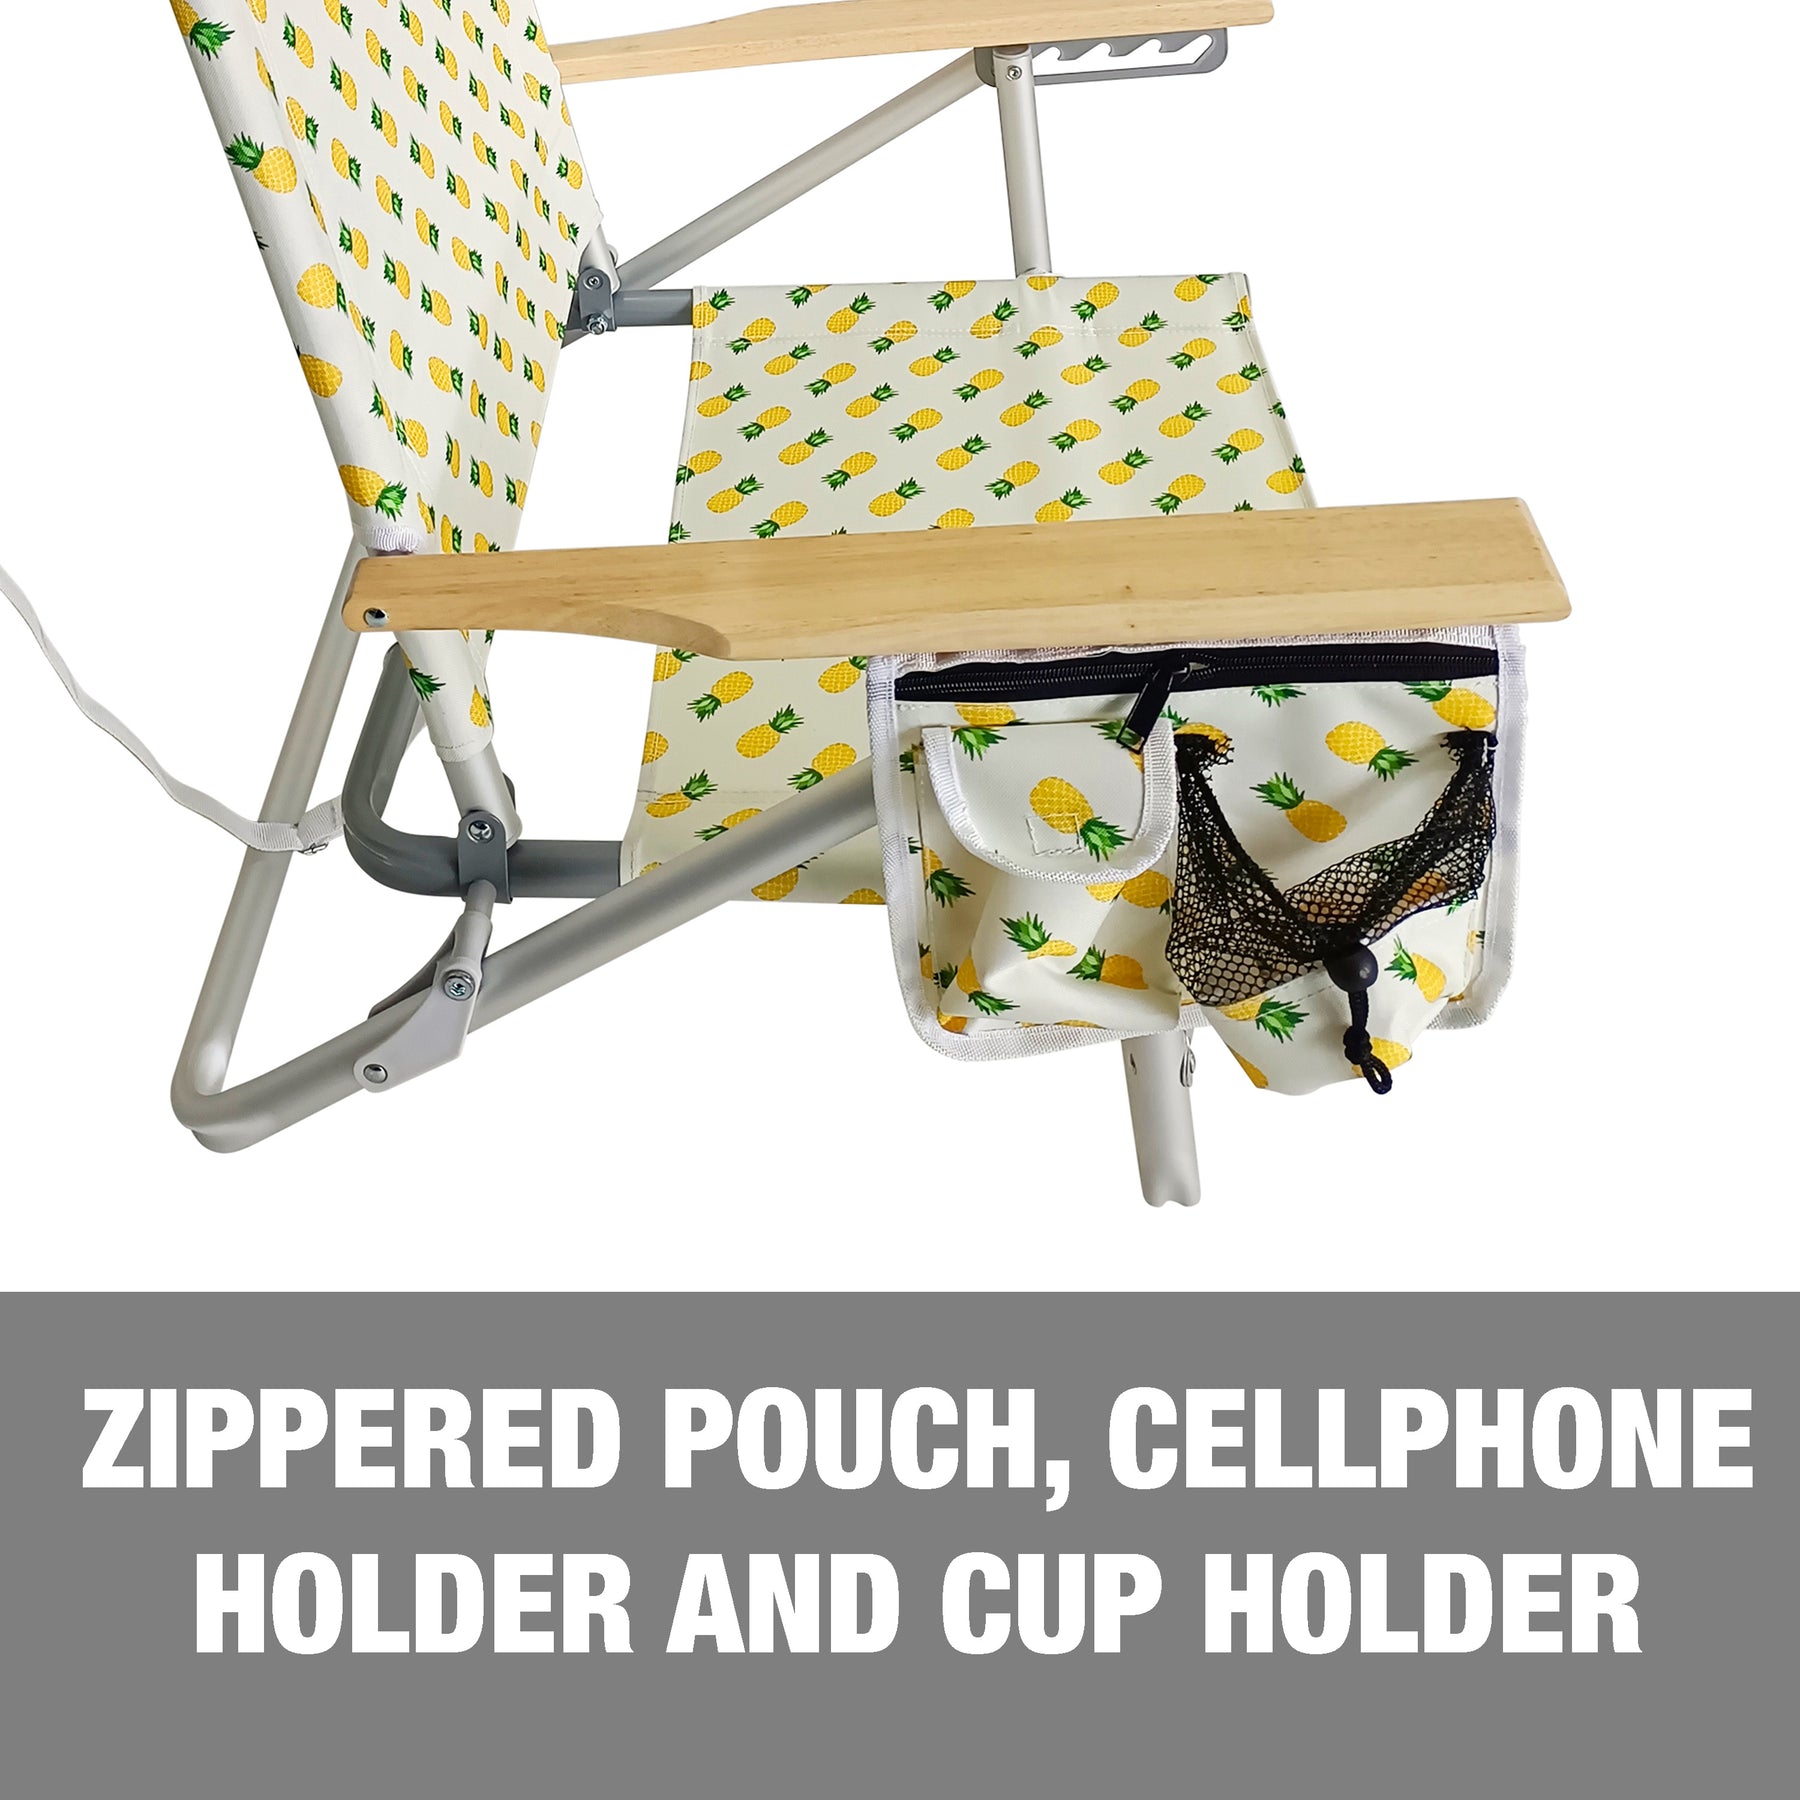 Features a zippered pouch, cellphone holder, and cup holder.